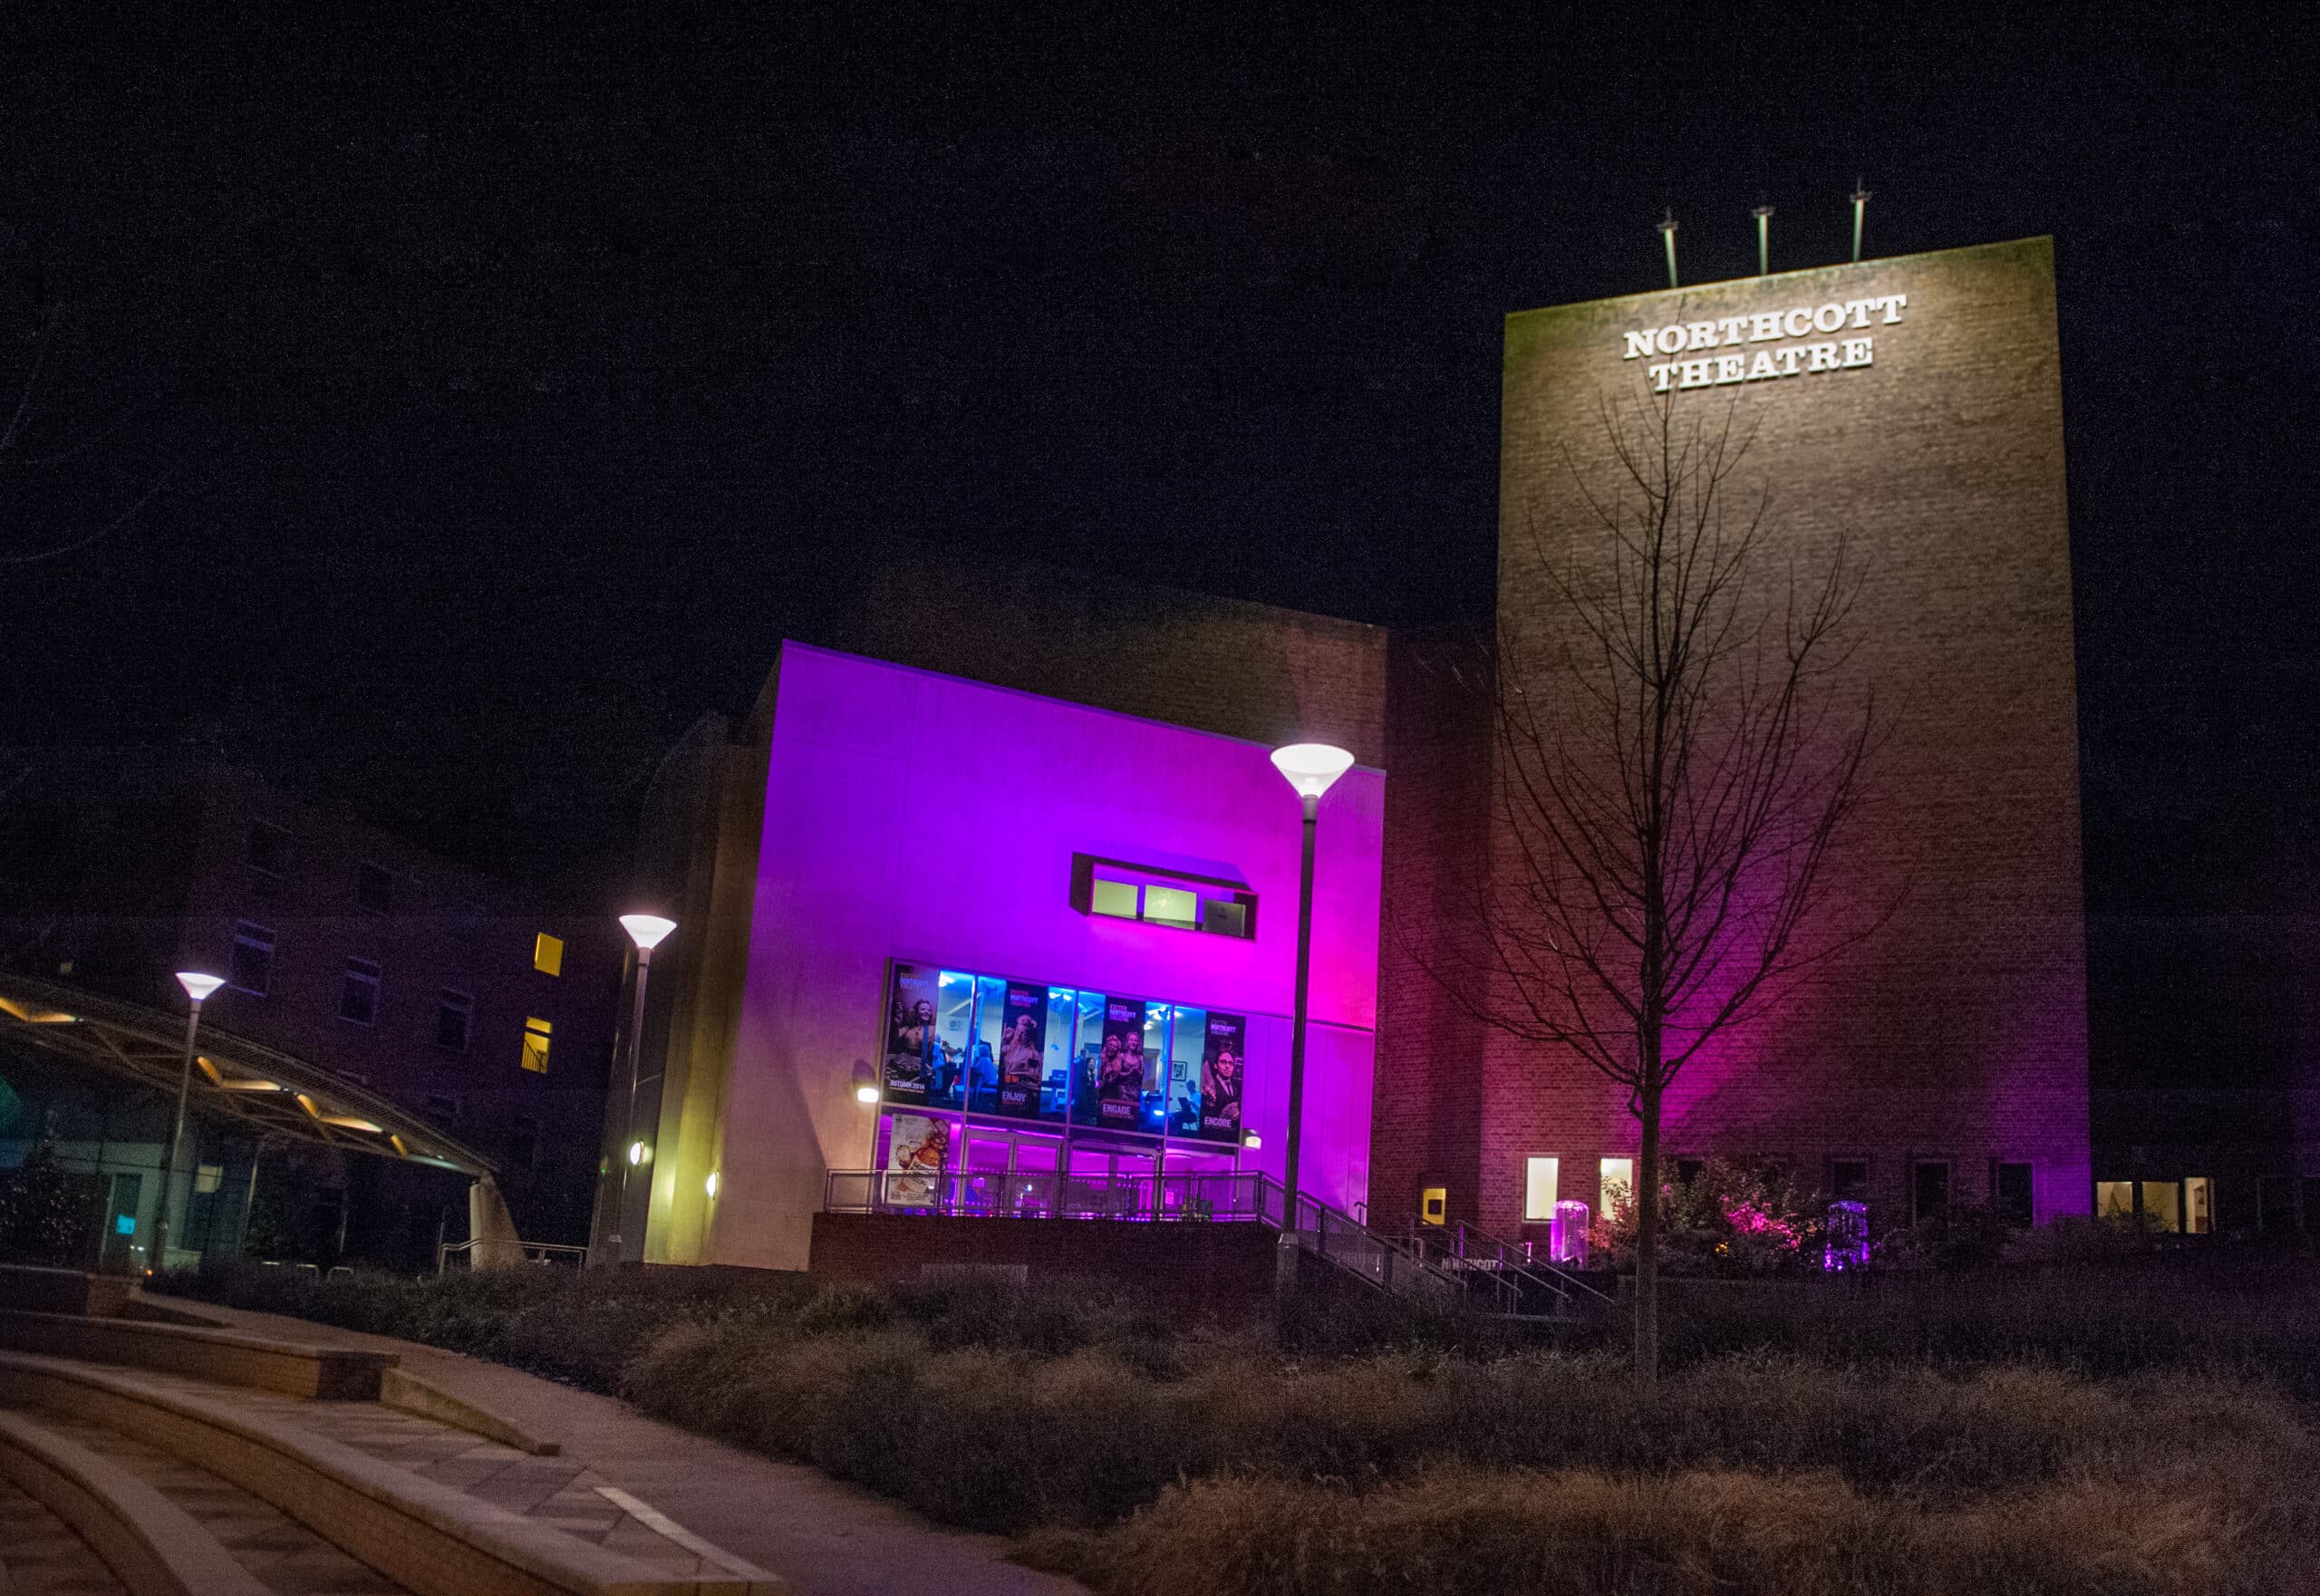 Photo of the Northcott theatre building at night